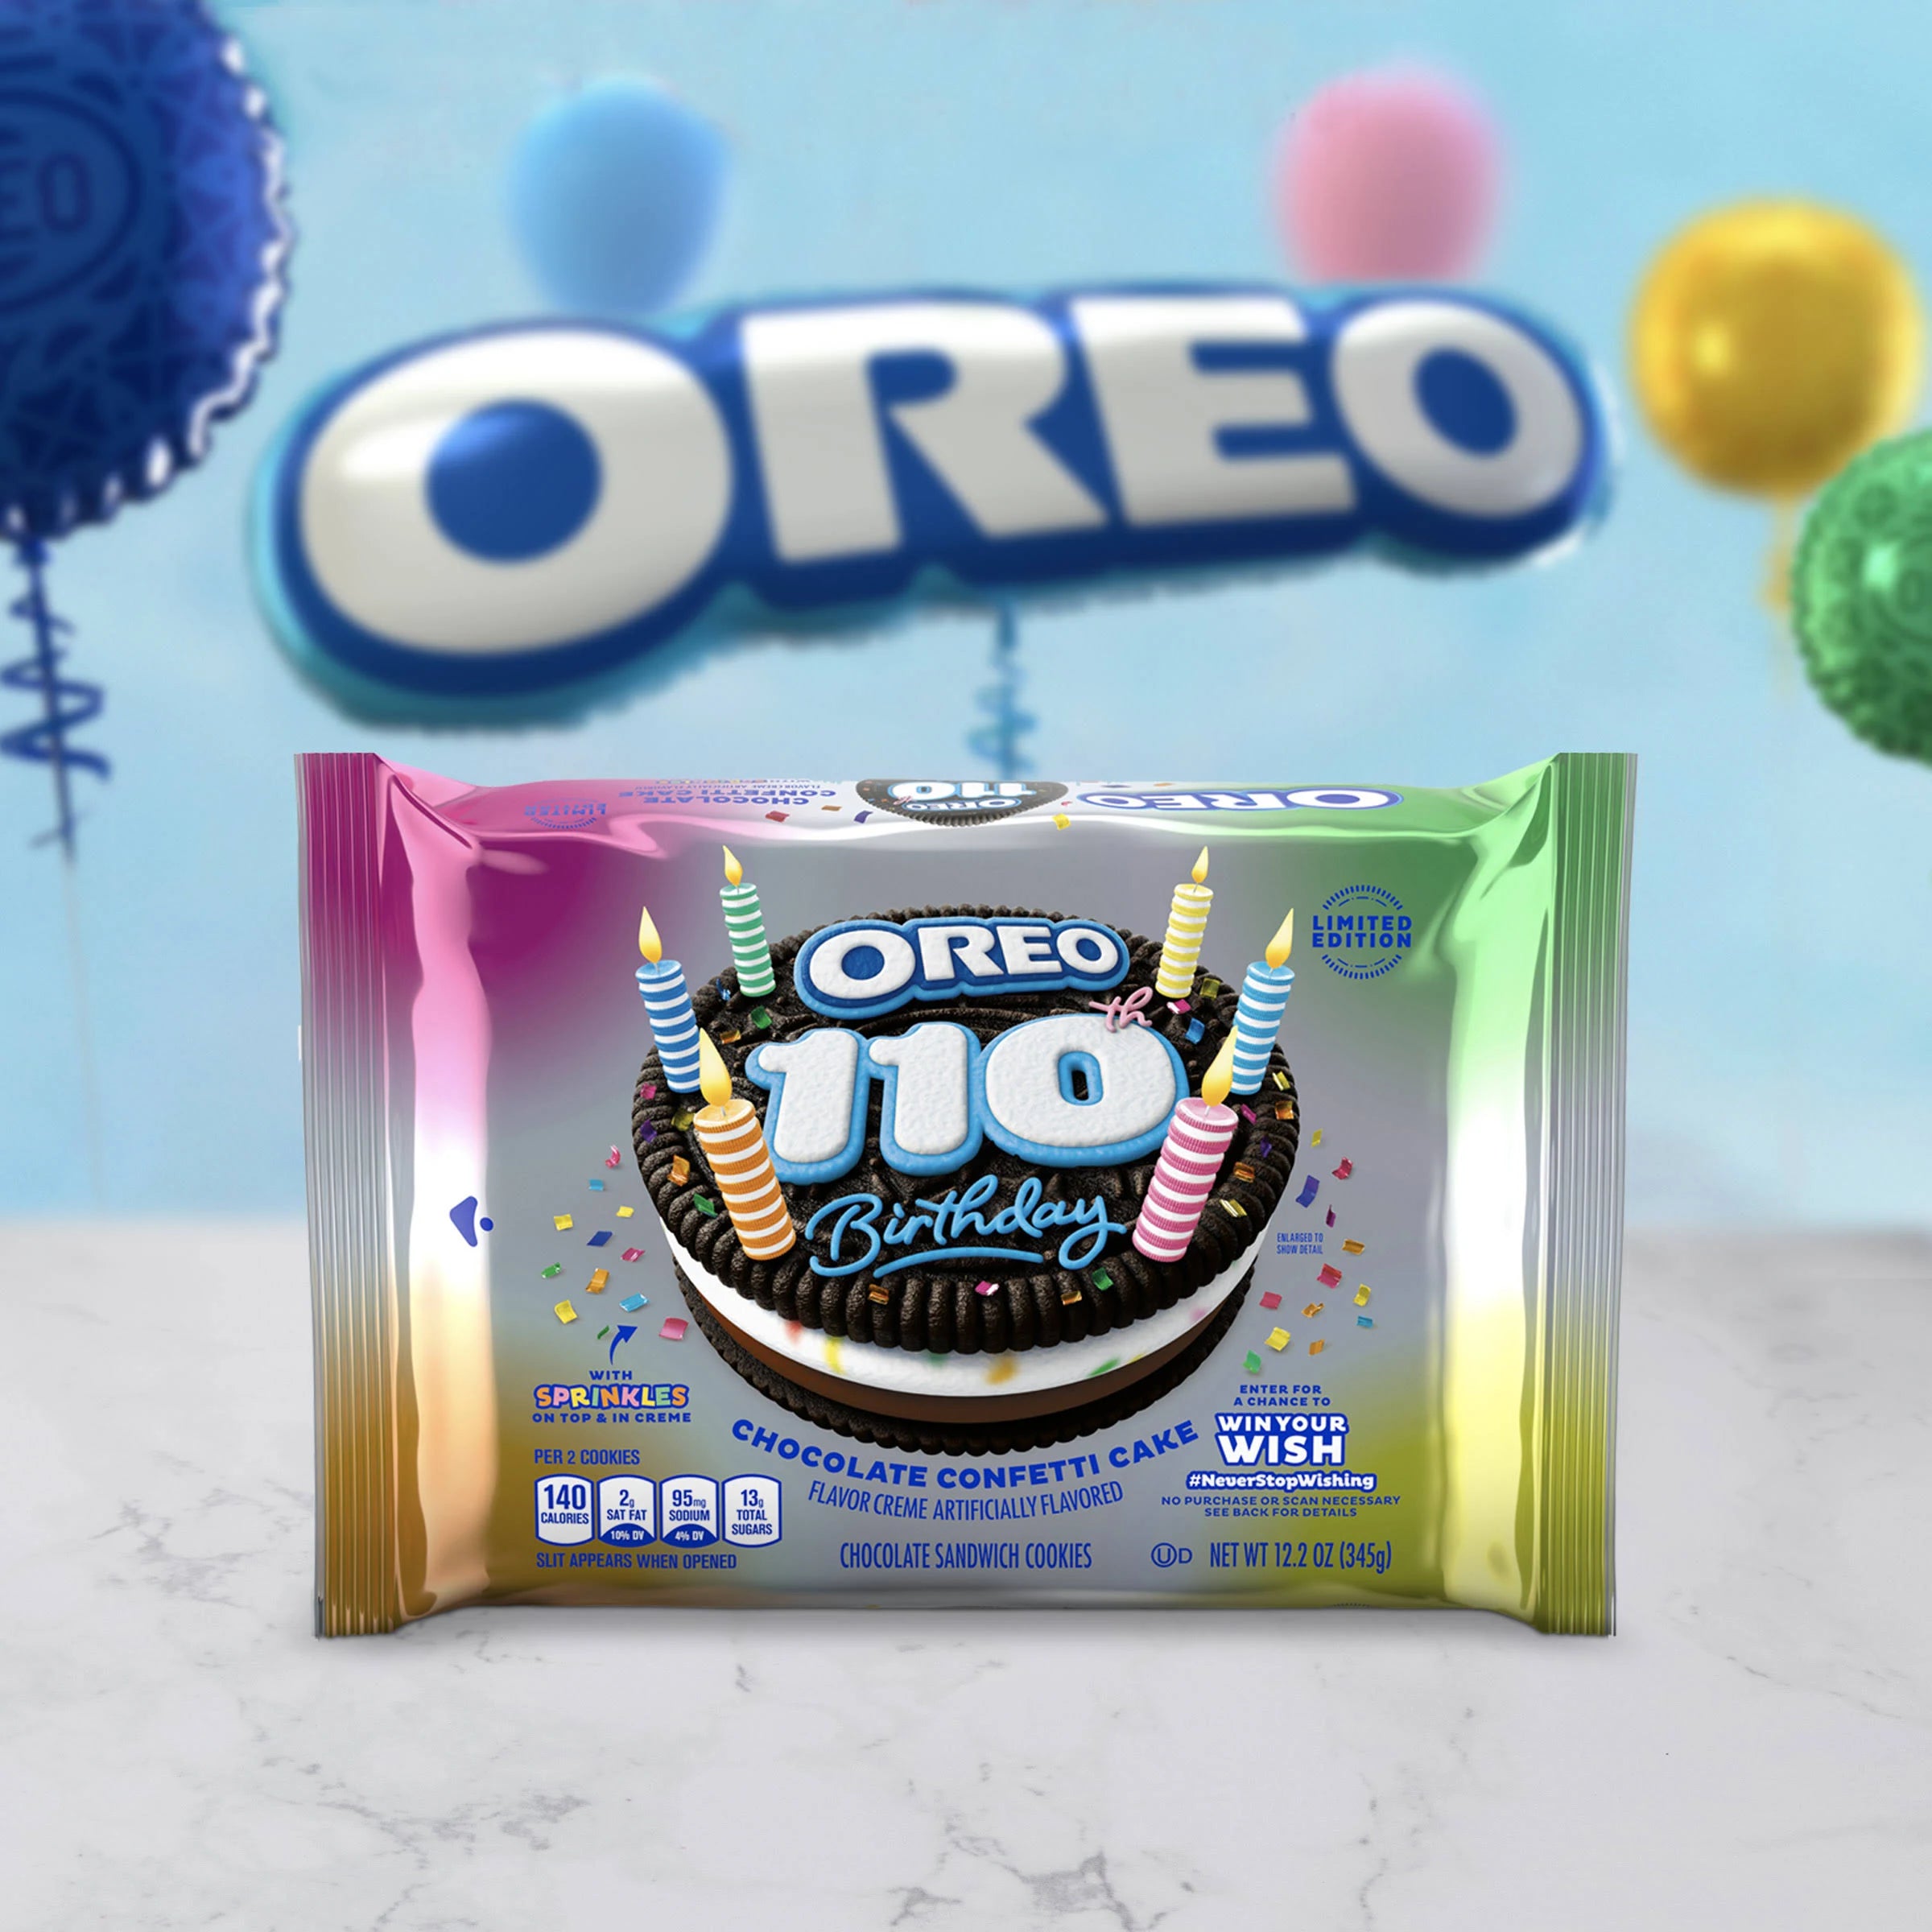 OREO 110th Birthday Chocolate Confetti Cake Chocolate Sandwich Cookies, Limited Edition, 12.2 oz Pack